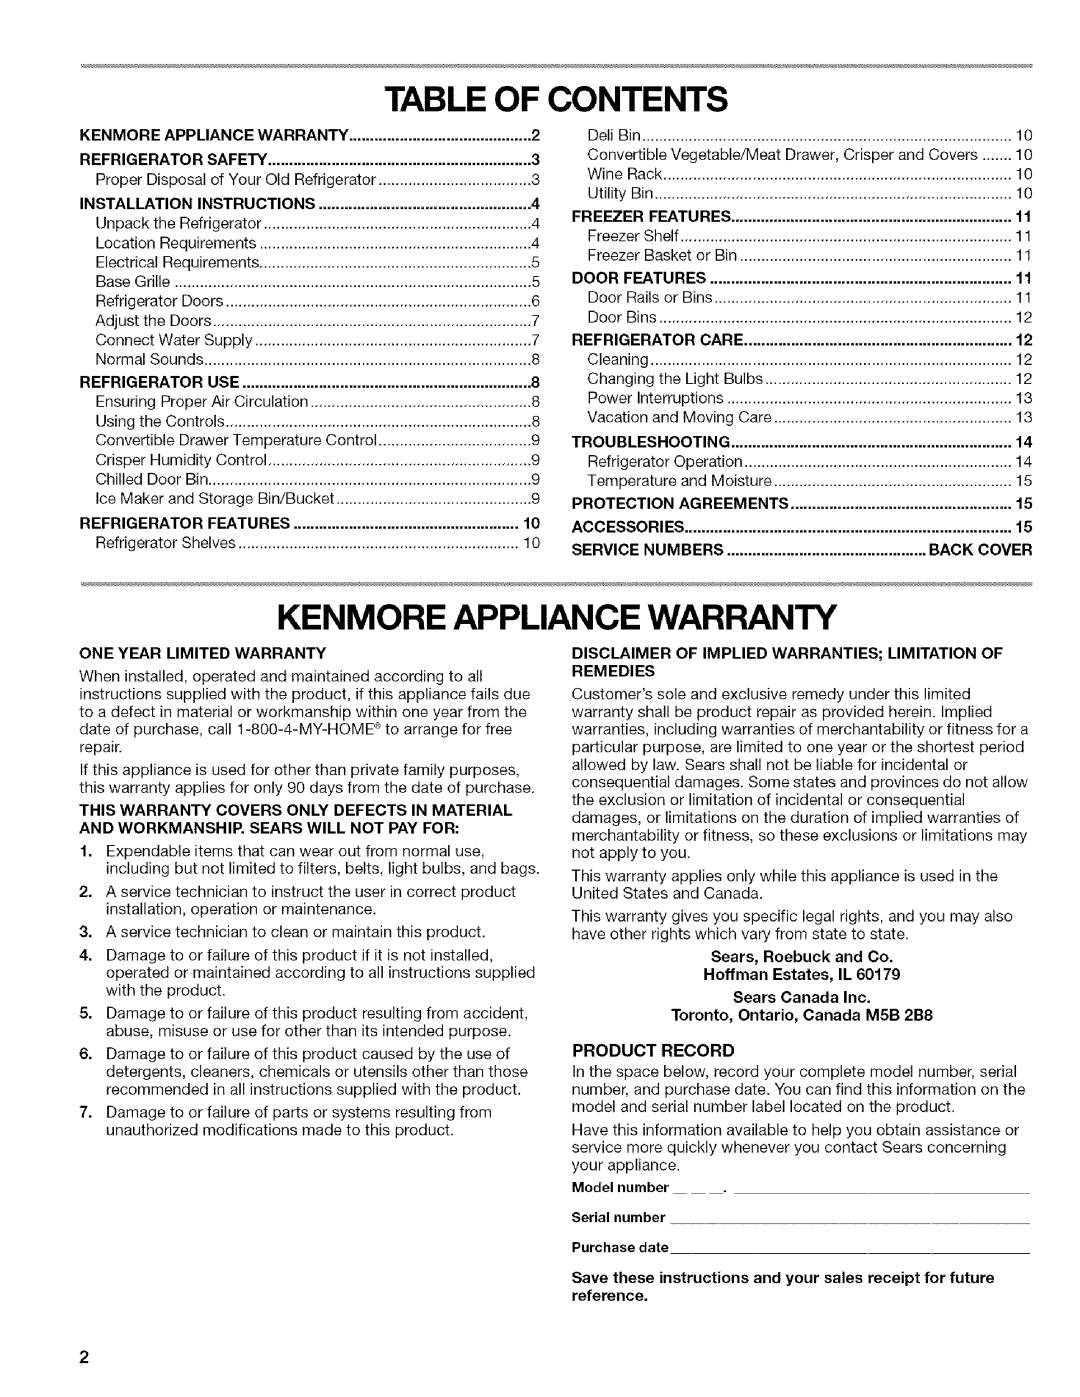 Kenmore w10144349A manual Table Of Contents, Kenmore Appliance Warranty, Refrigerator, Freezer, Protection, Agreements 